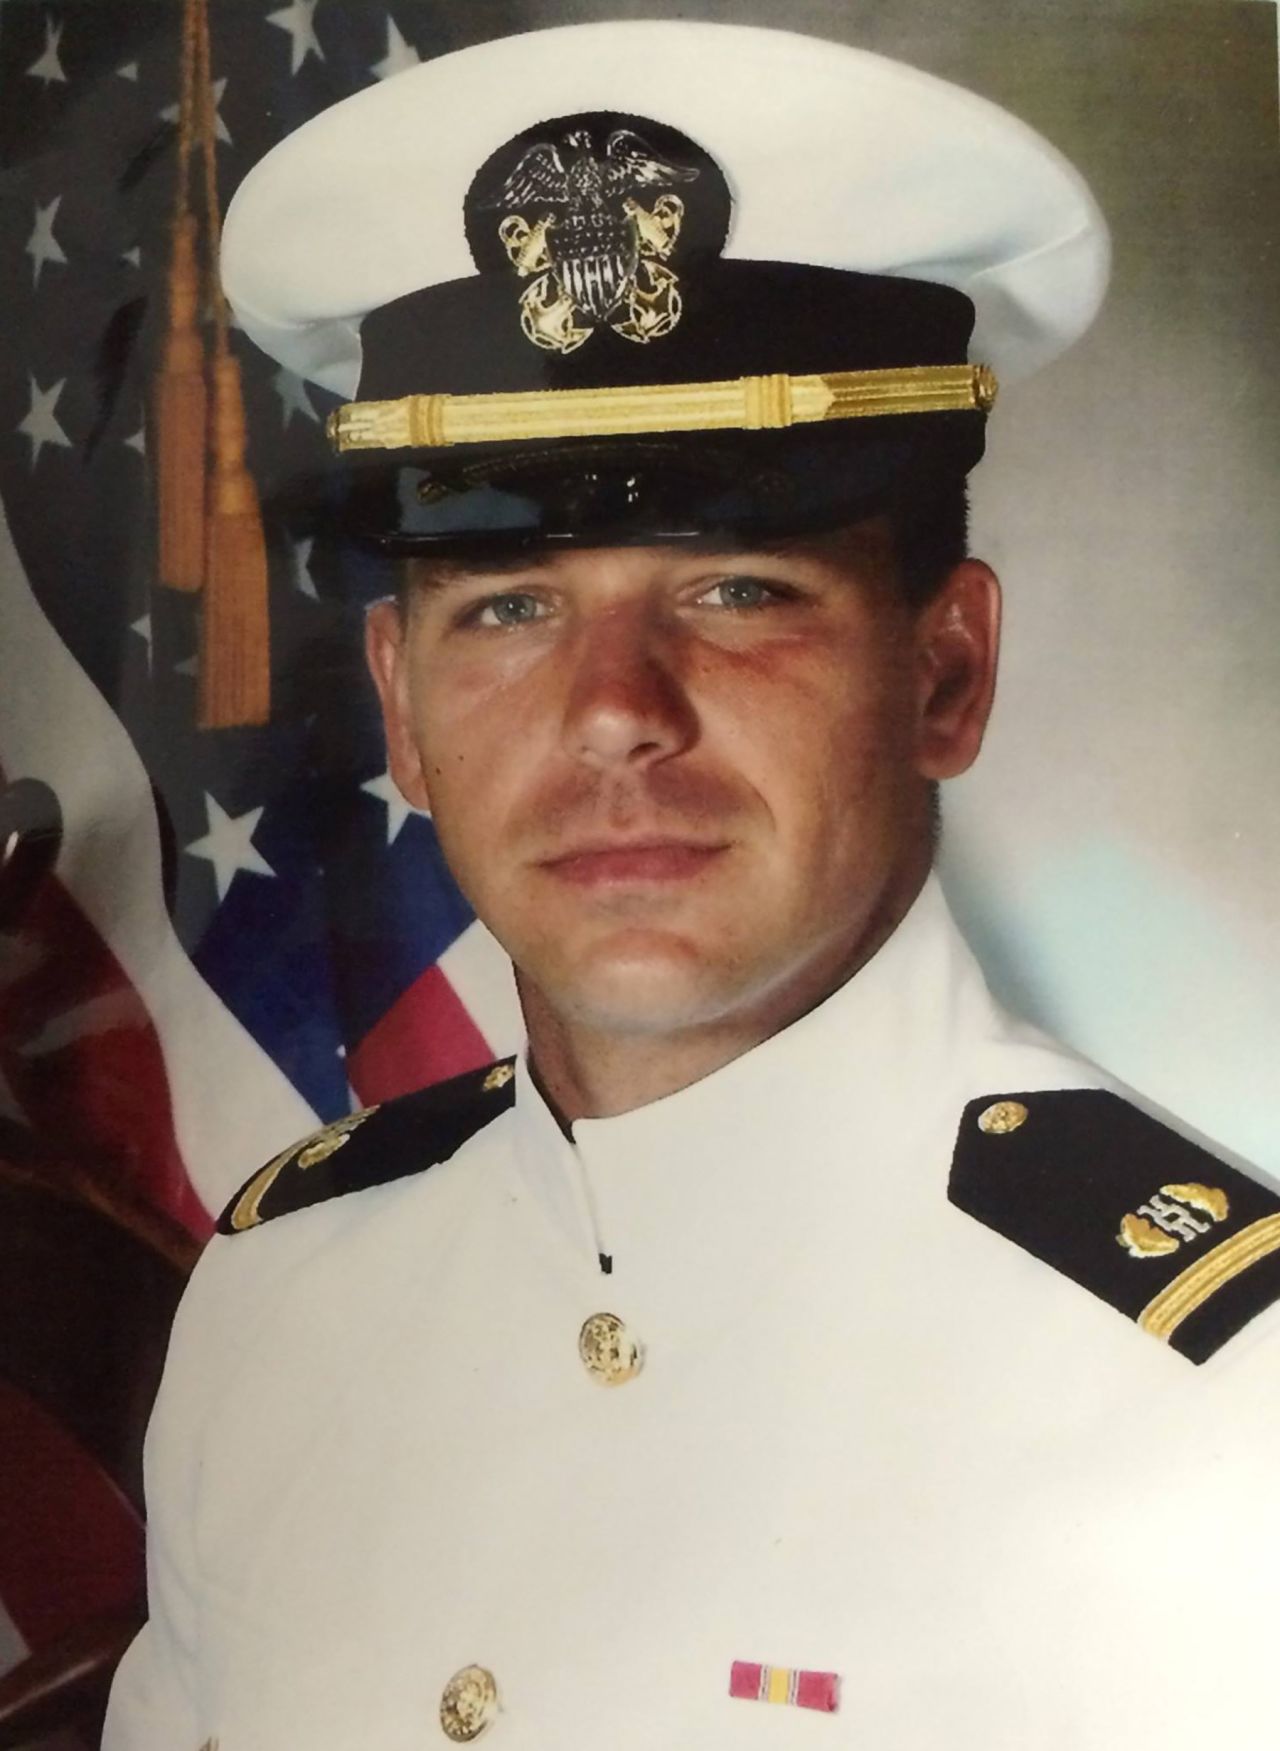 DeSantis joined the US Navy in 2004. This was his first official photo as a Navy ensign. He was assigned to the Navy Judge Advocate General's Corps.